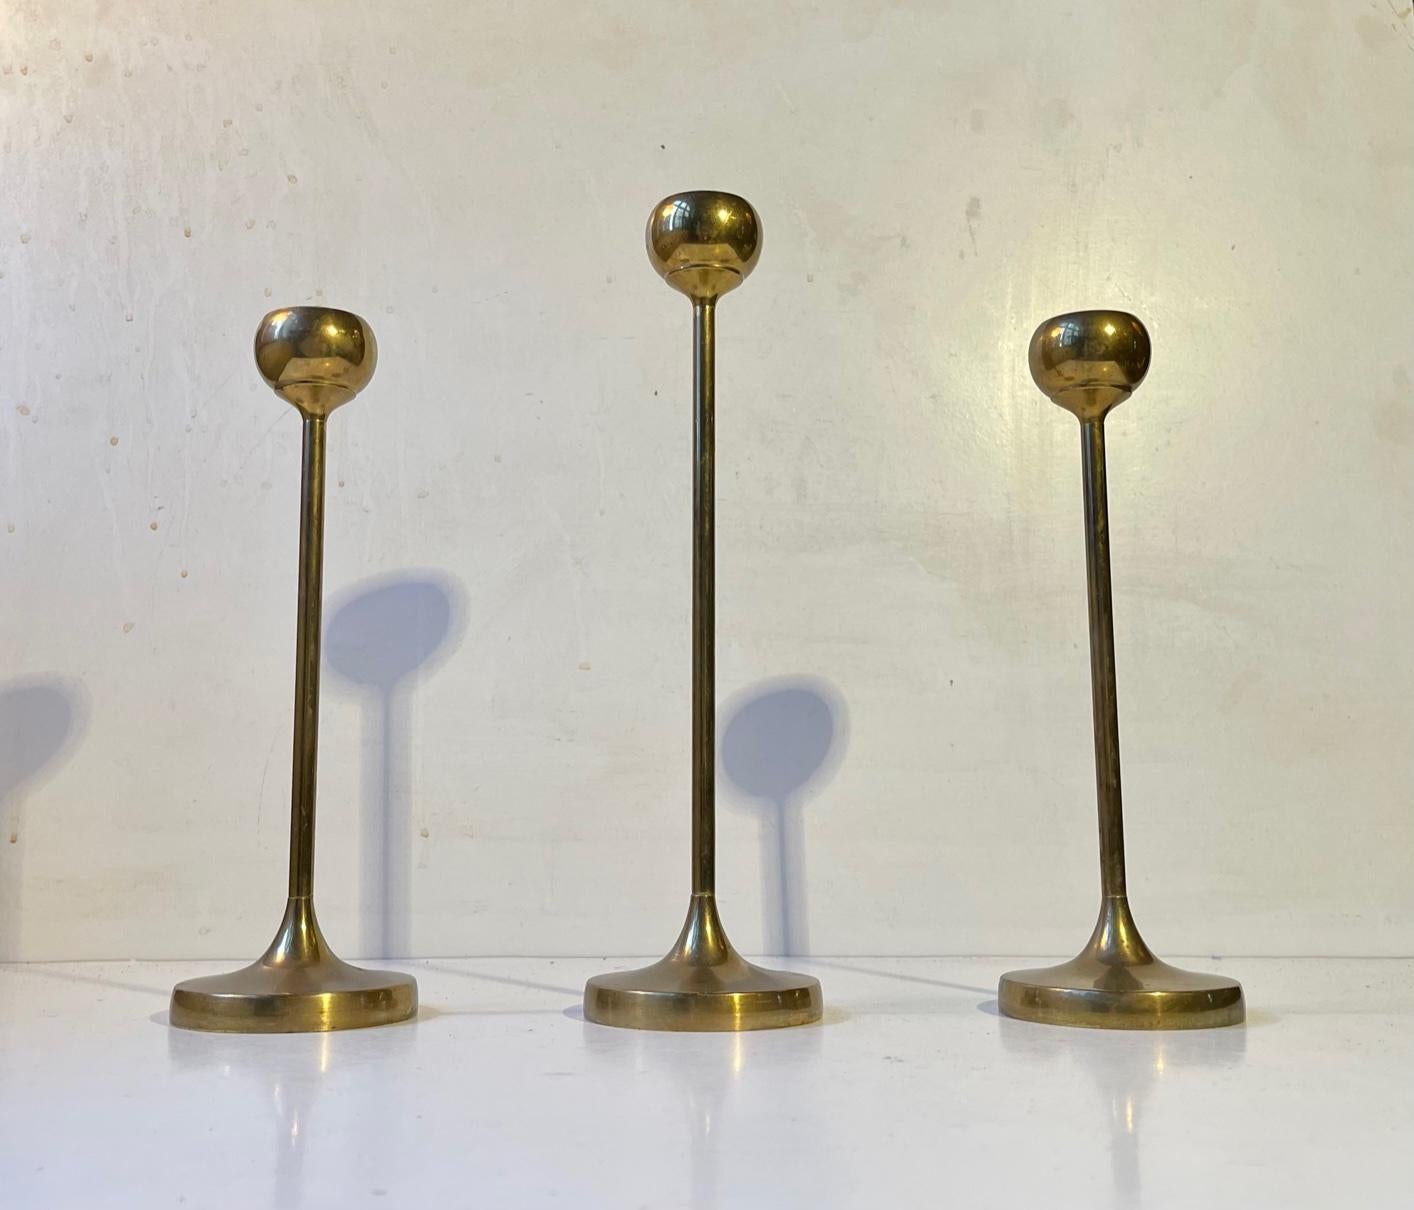 A trio of tulip shaped brass candlesticks designed and manufactured in Scandinavia during the 1960s ina style reminiscent of Pierre Forssell. The candlesticks are in a heavy quality and are to be fitted with regular sixed candles. They have not been